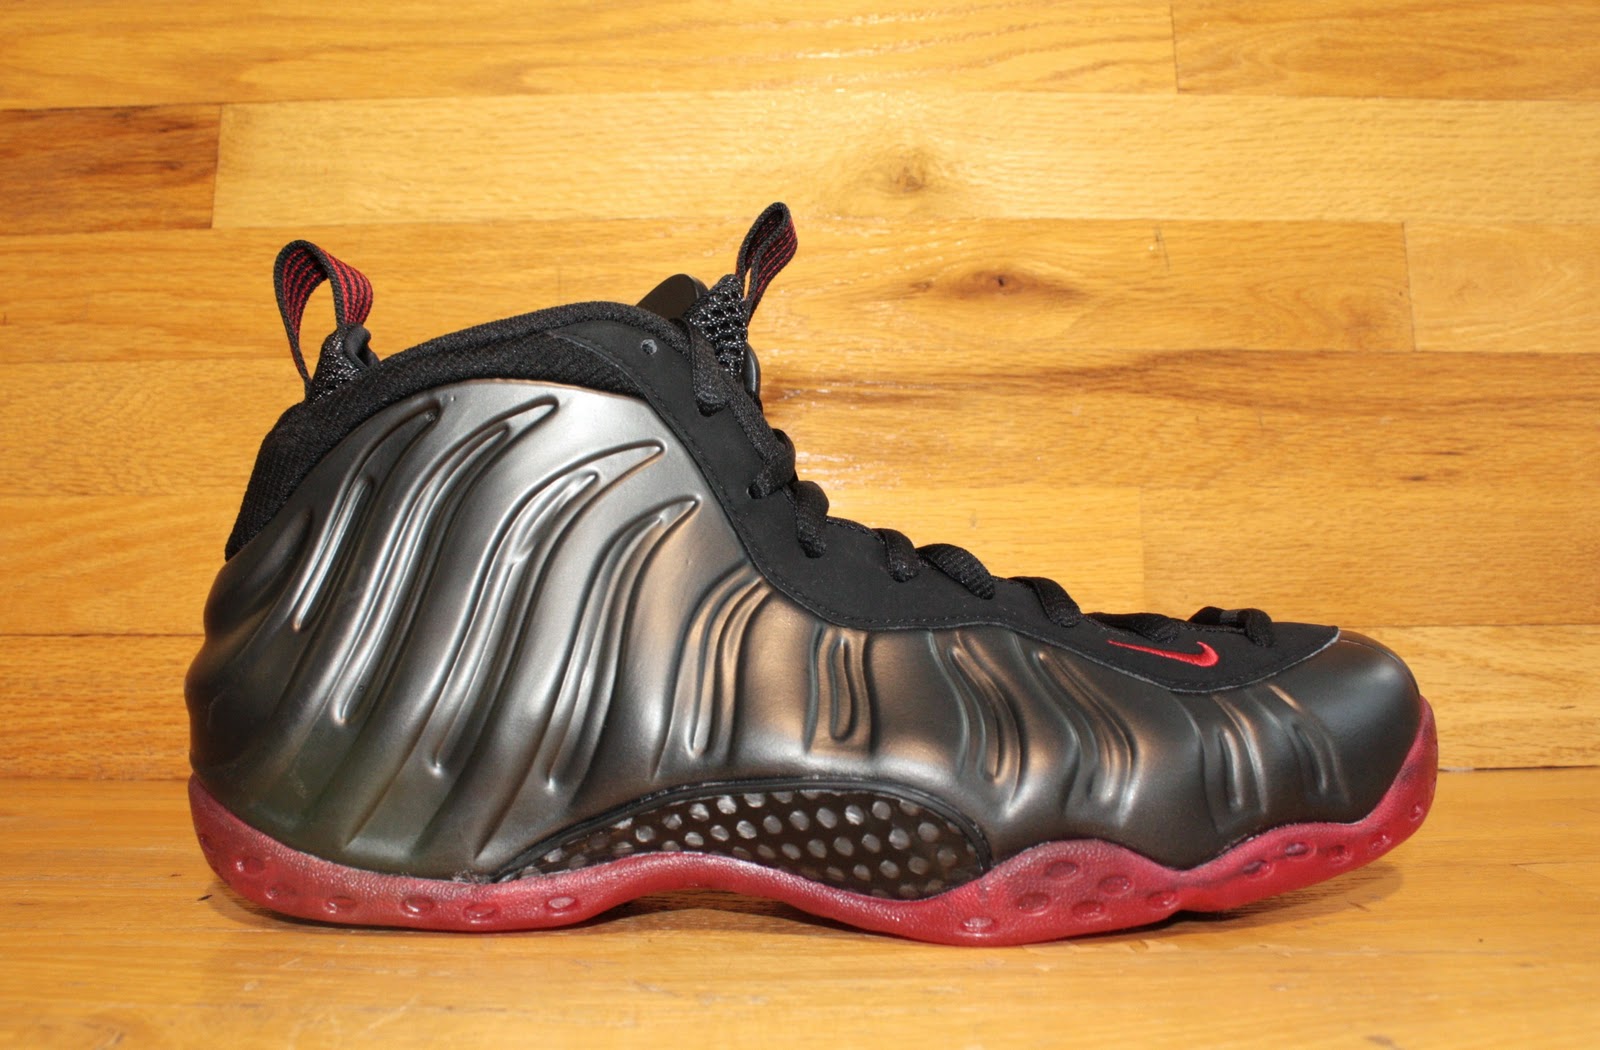 Dr. Jays Stores: Nike Foamposite Cough Drops Available in Dr Jays Stores